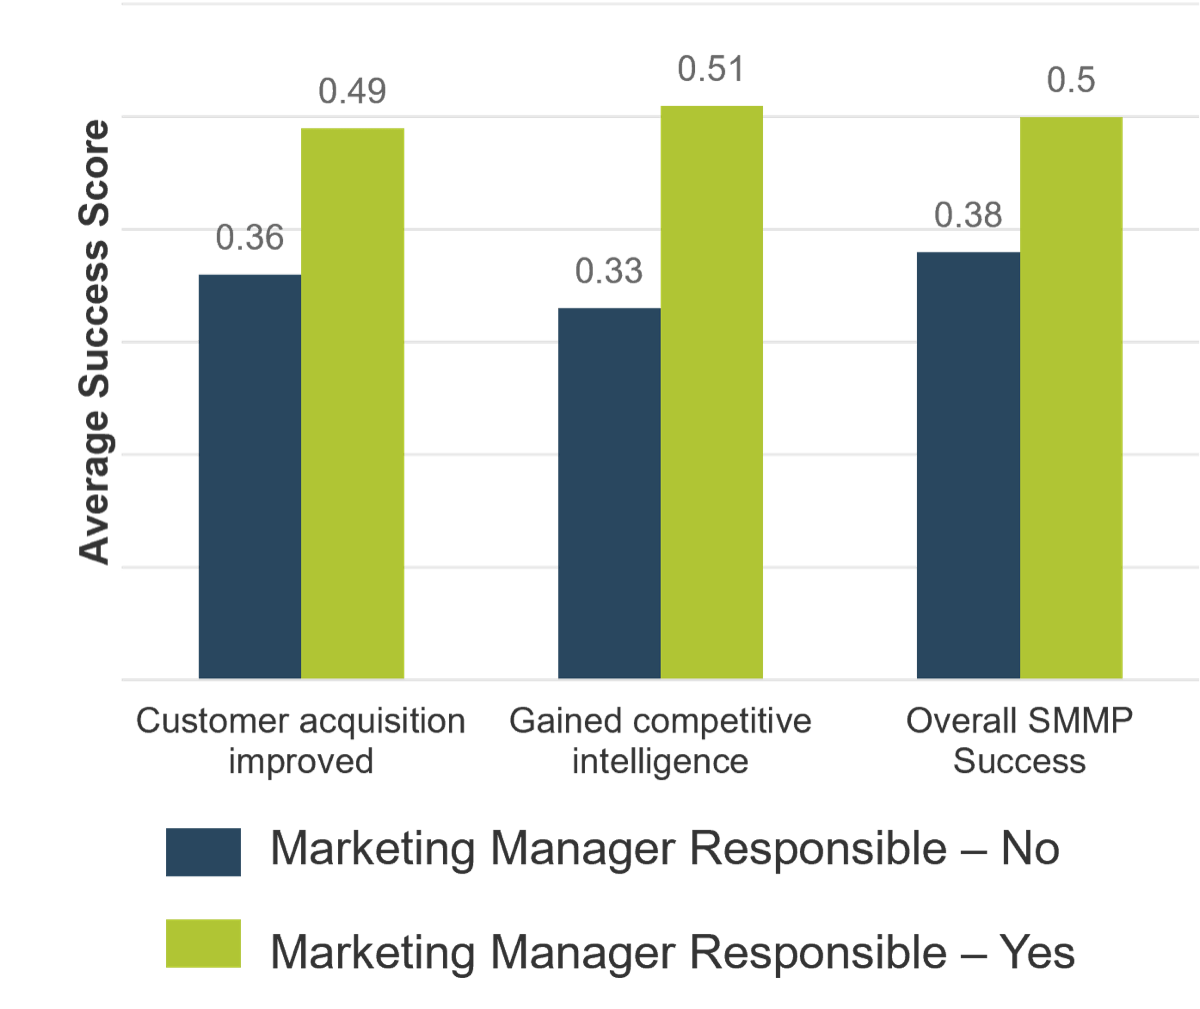 Bar Chart comparing 'Average Success Scores' of different goals based on whether the 'Marketing Manager [was] Responsible' or not. Scores are always higher when they were.